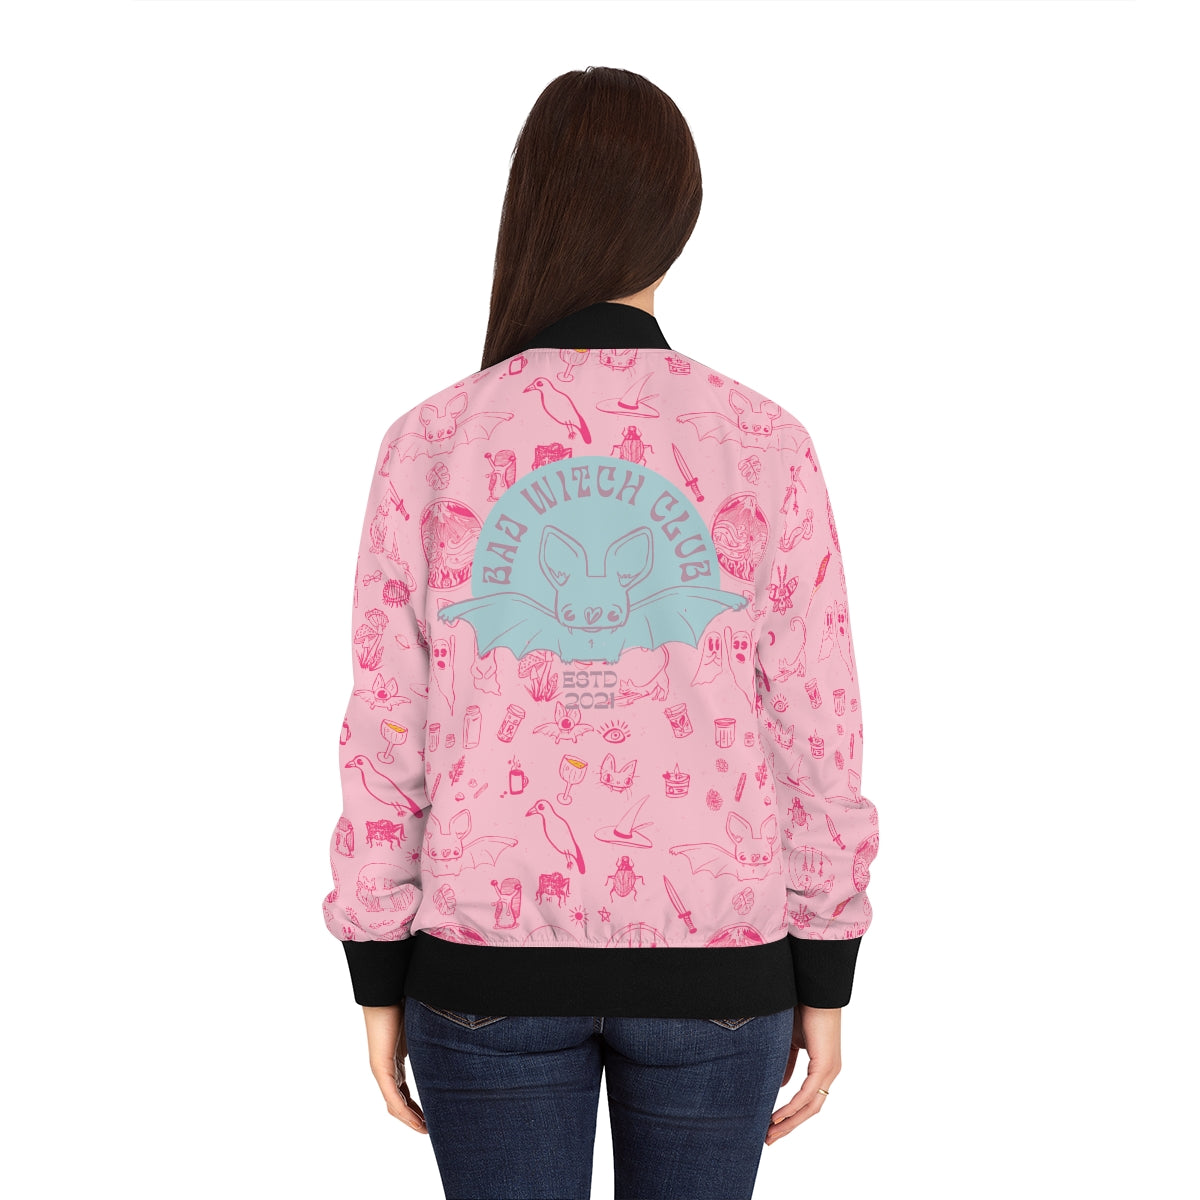 Bad Witch Club Woven Bomber Jacket - Pinky